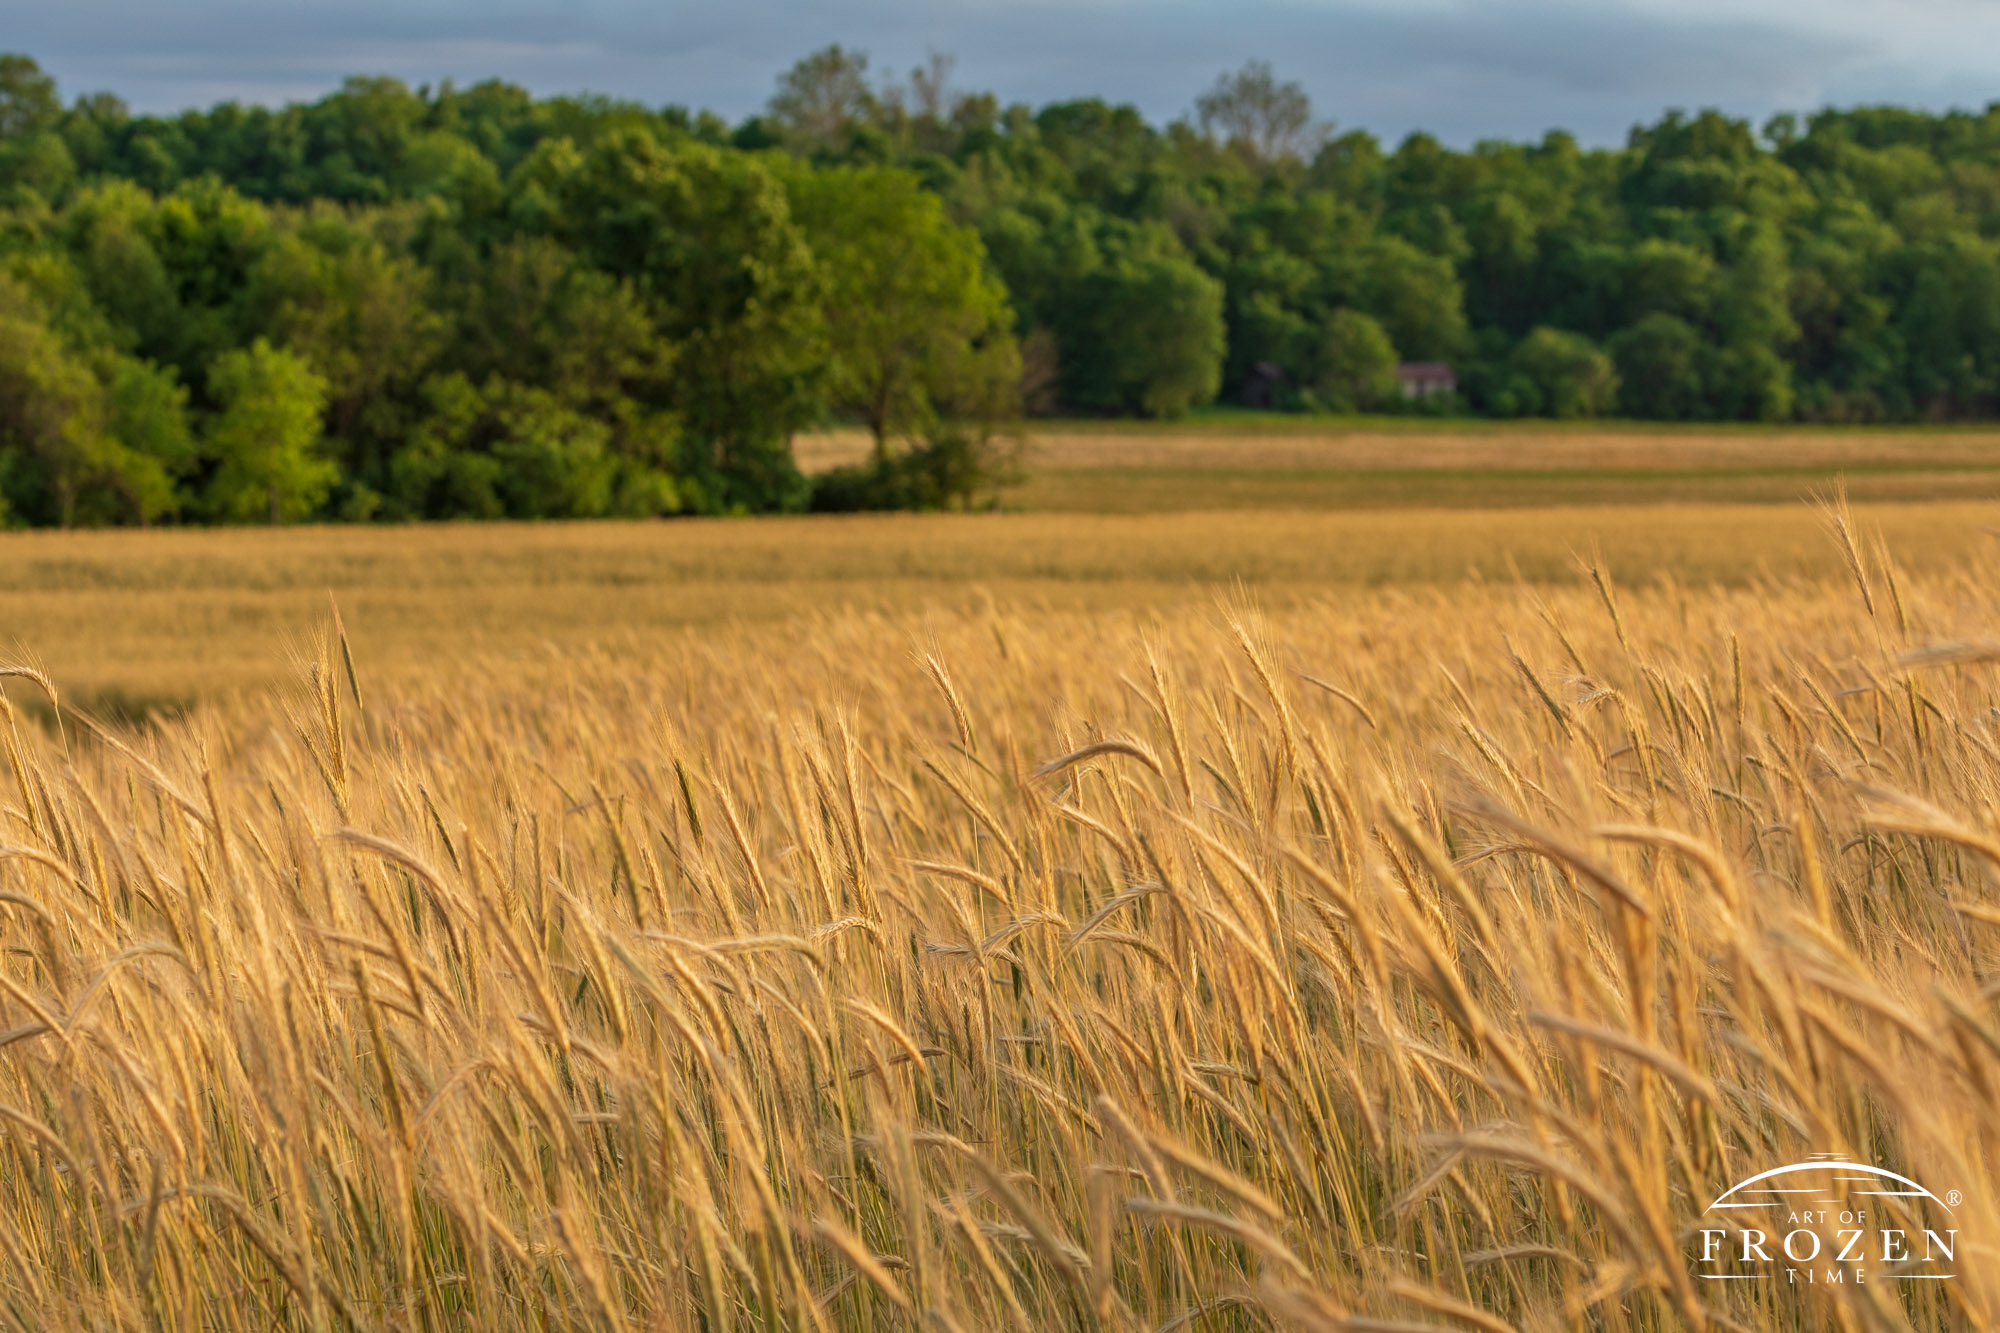 Nearly mature wheat awaits harvest as the sun’s last rays paints the field in warm golden light.